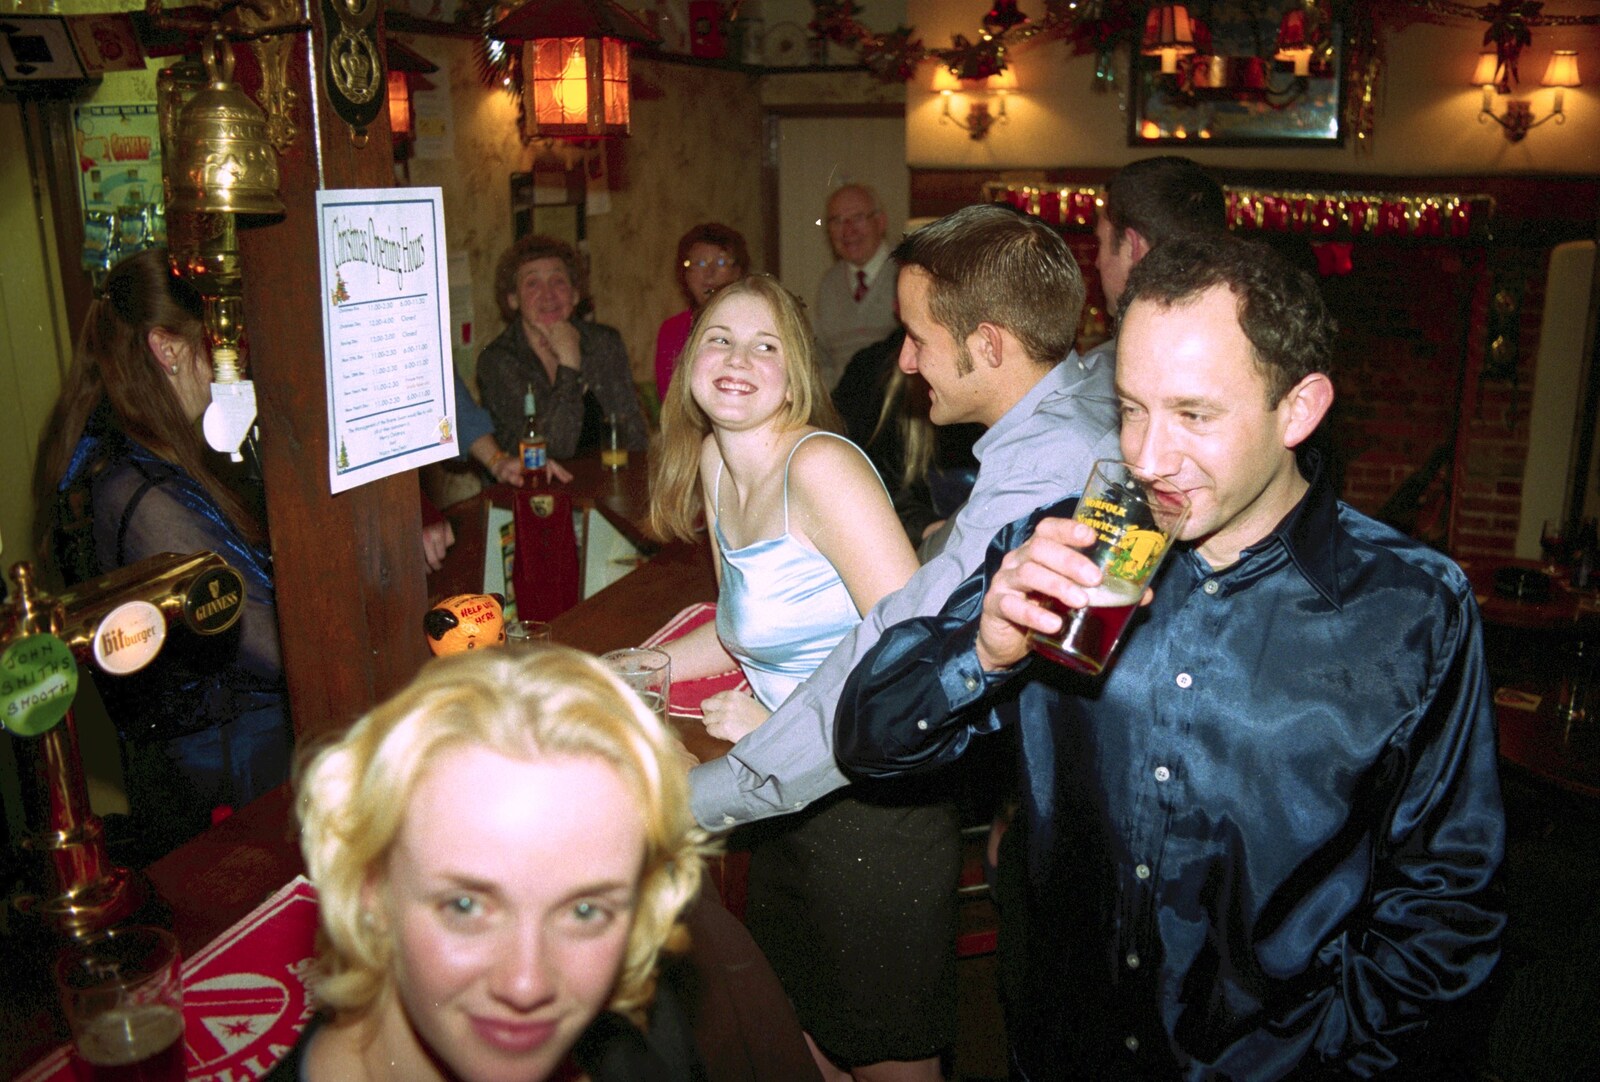 Lorraine and Shane at the bar from New Year's Eve at The Swan Inn, Brome, Suffolk - 31st December 1999